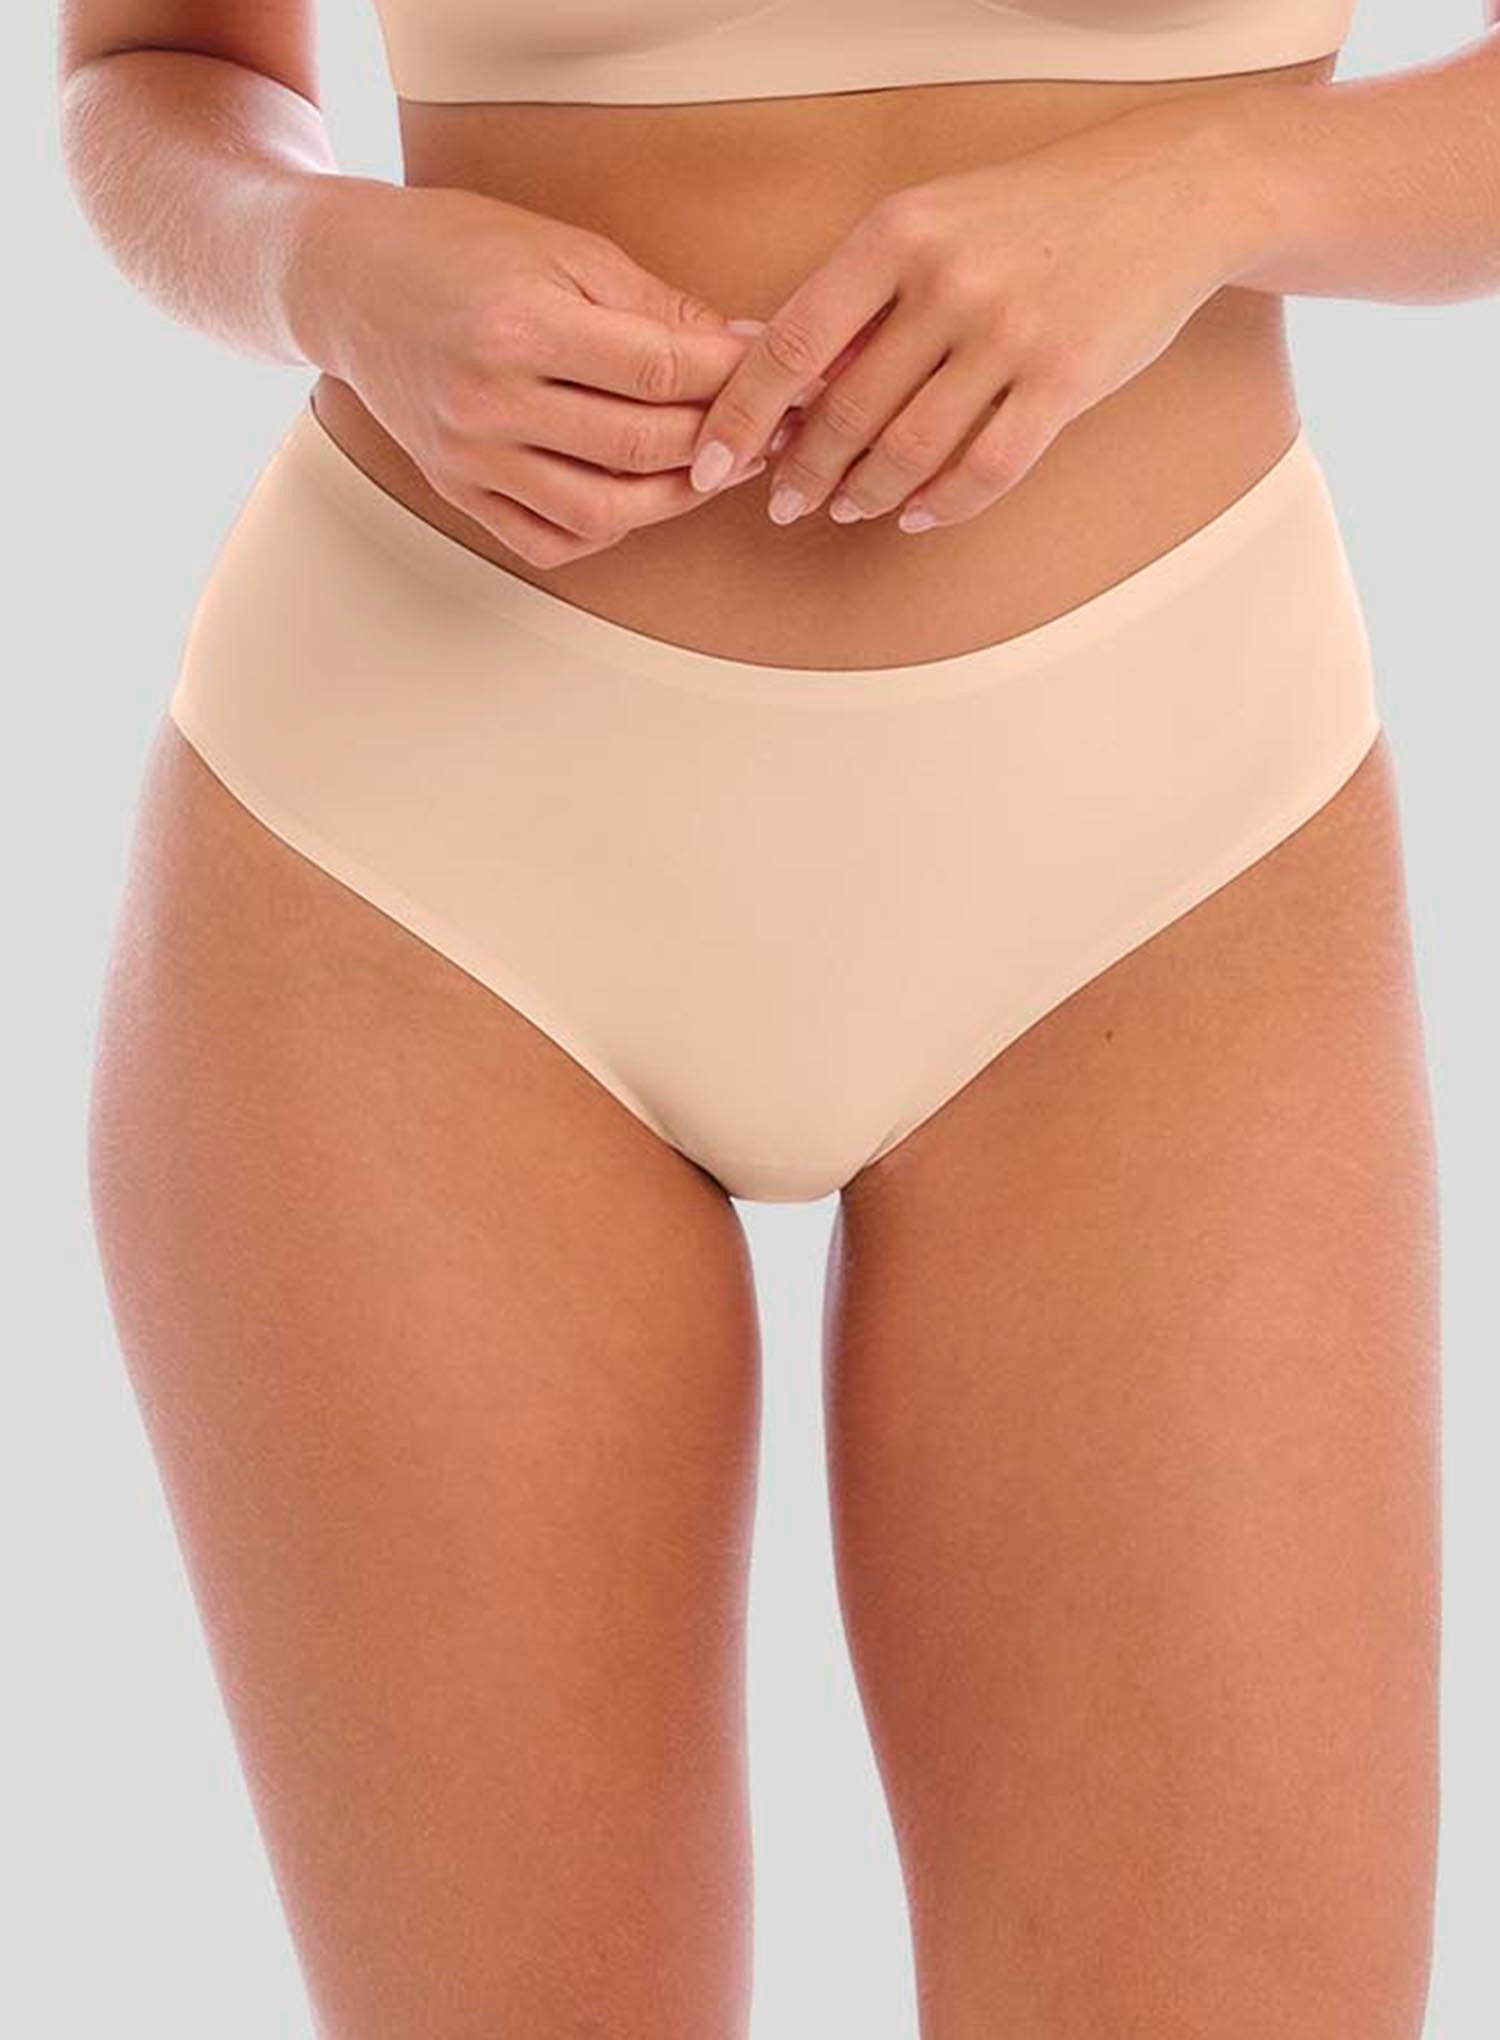 Fantasie Smoothease Invisible Stretch Thong - Natural Beige